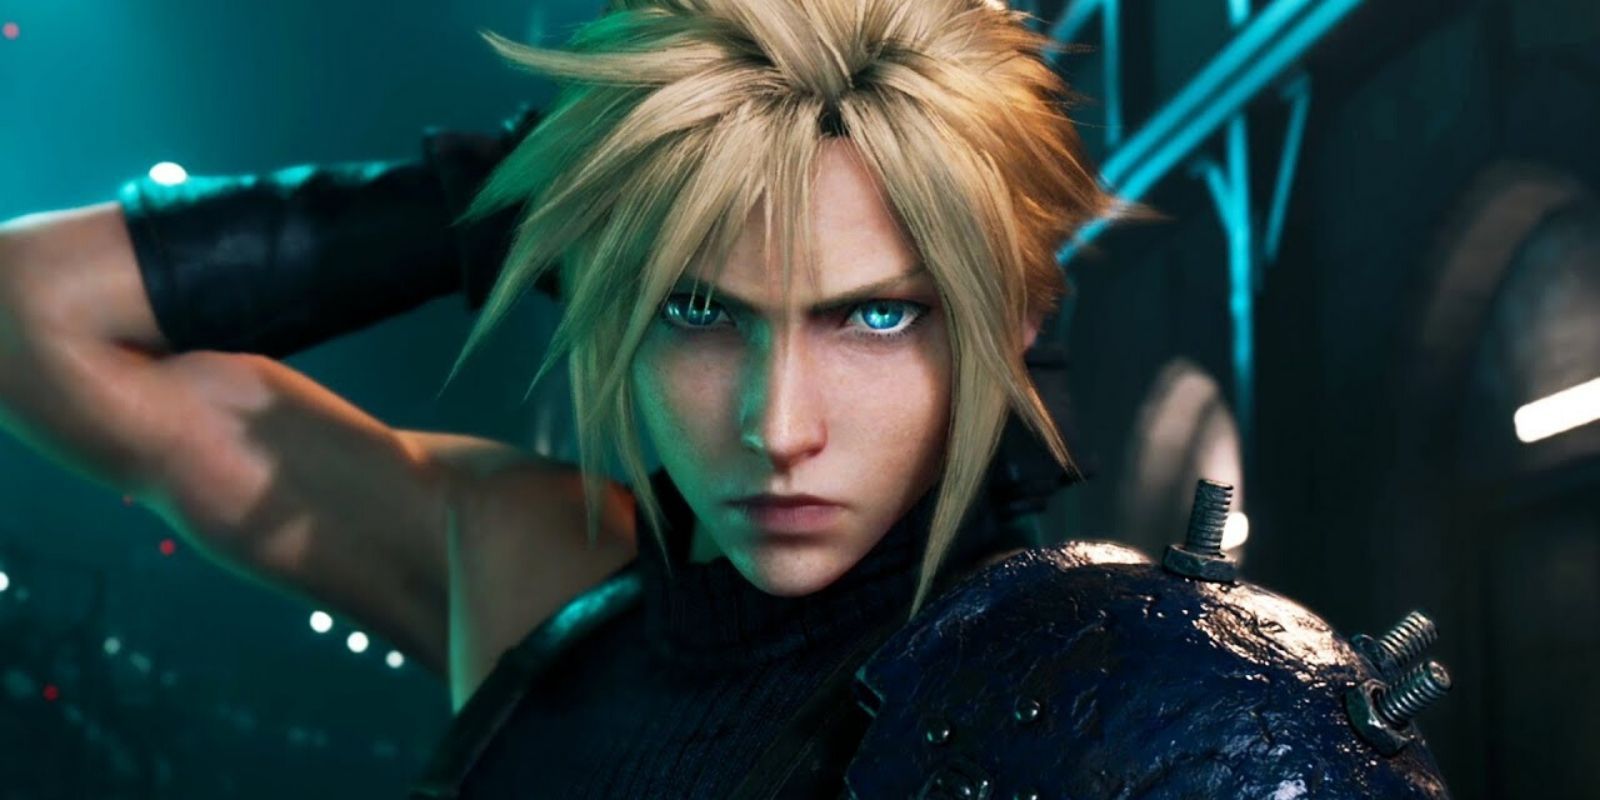 Final Fantasy VII Fan’s Mind-Blowing Cosplay Took Over 100 Hours to Make